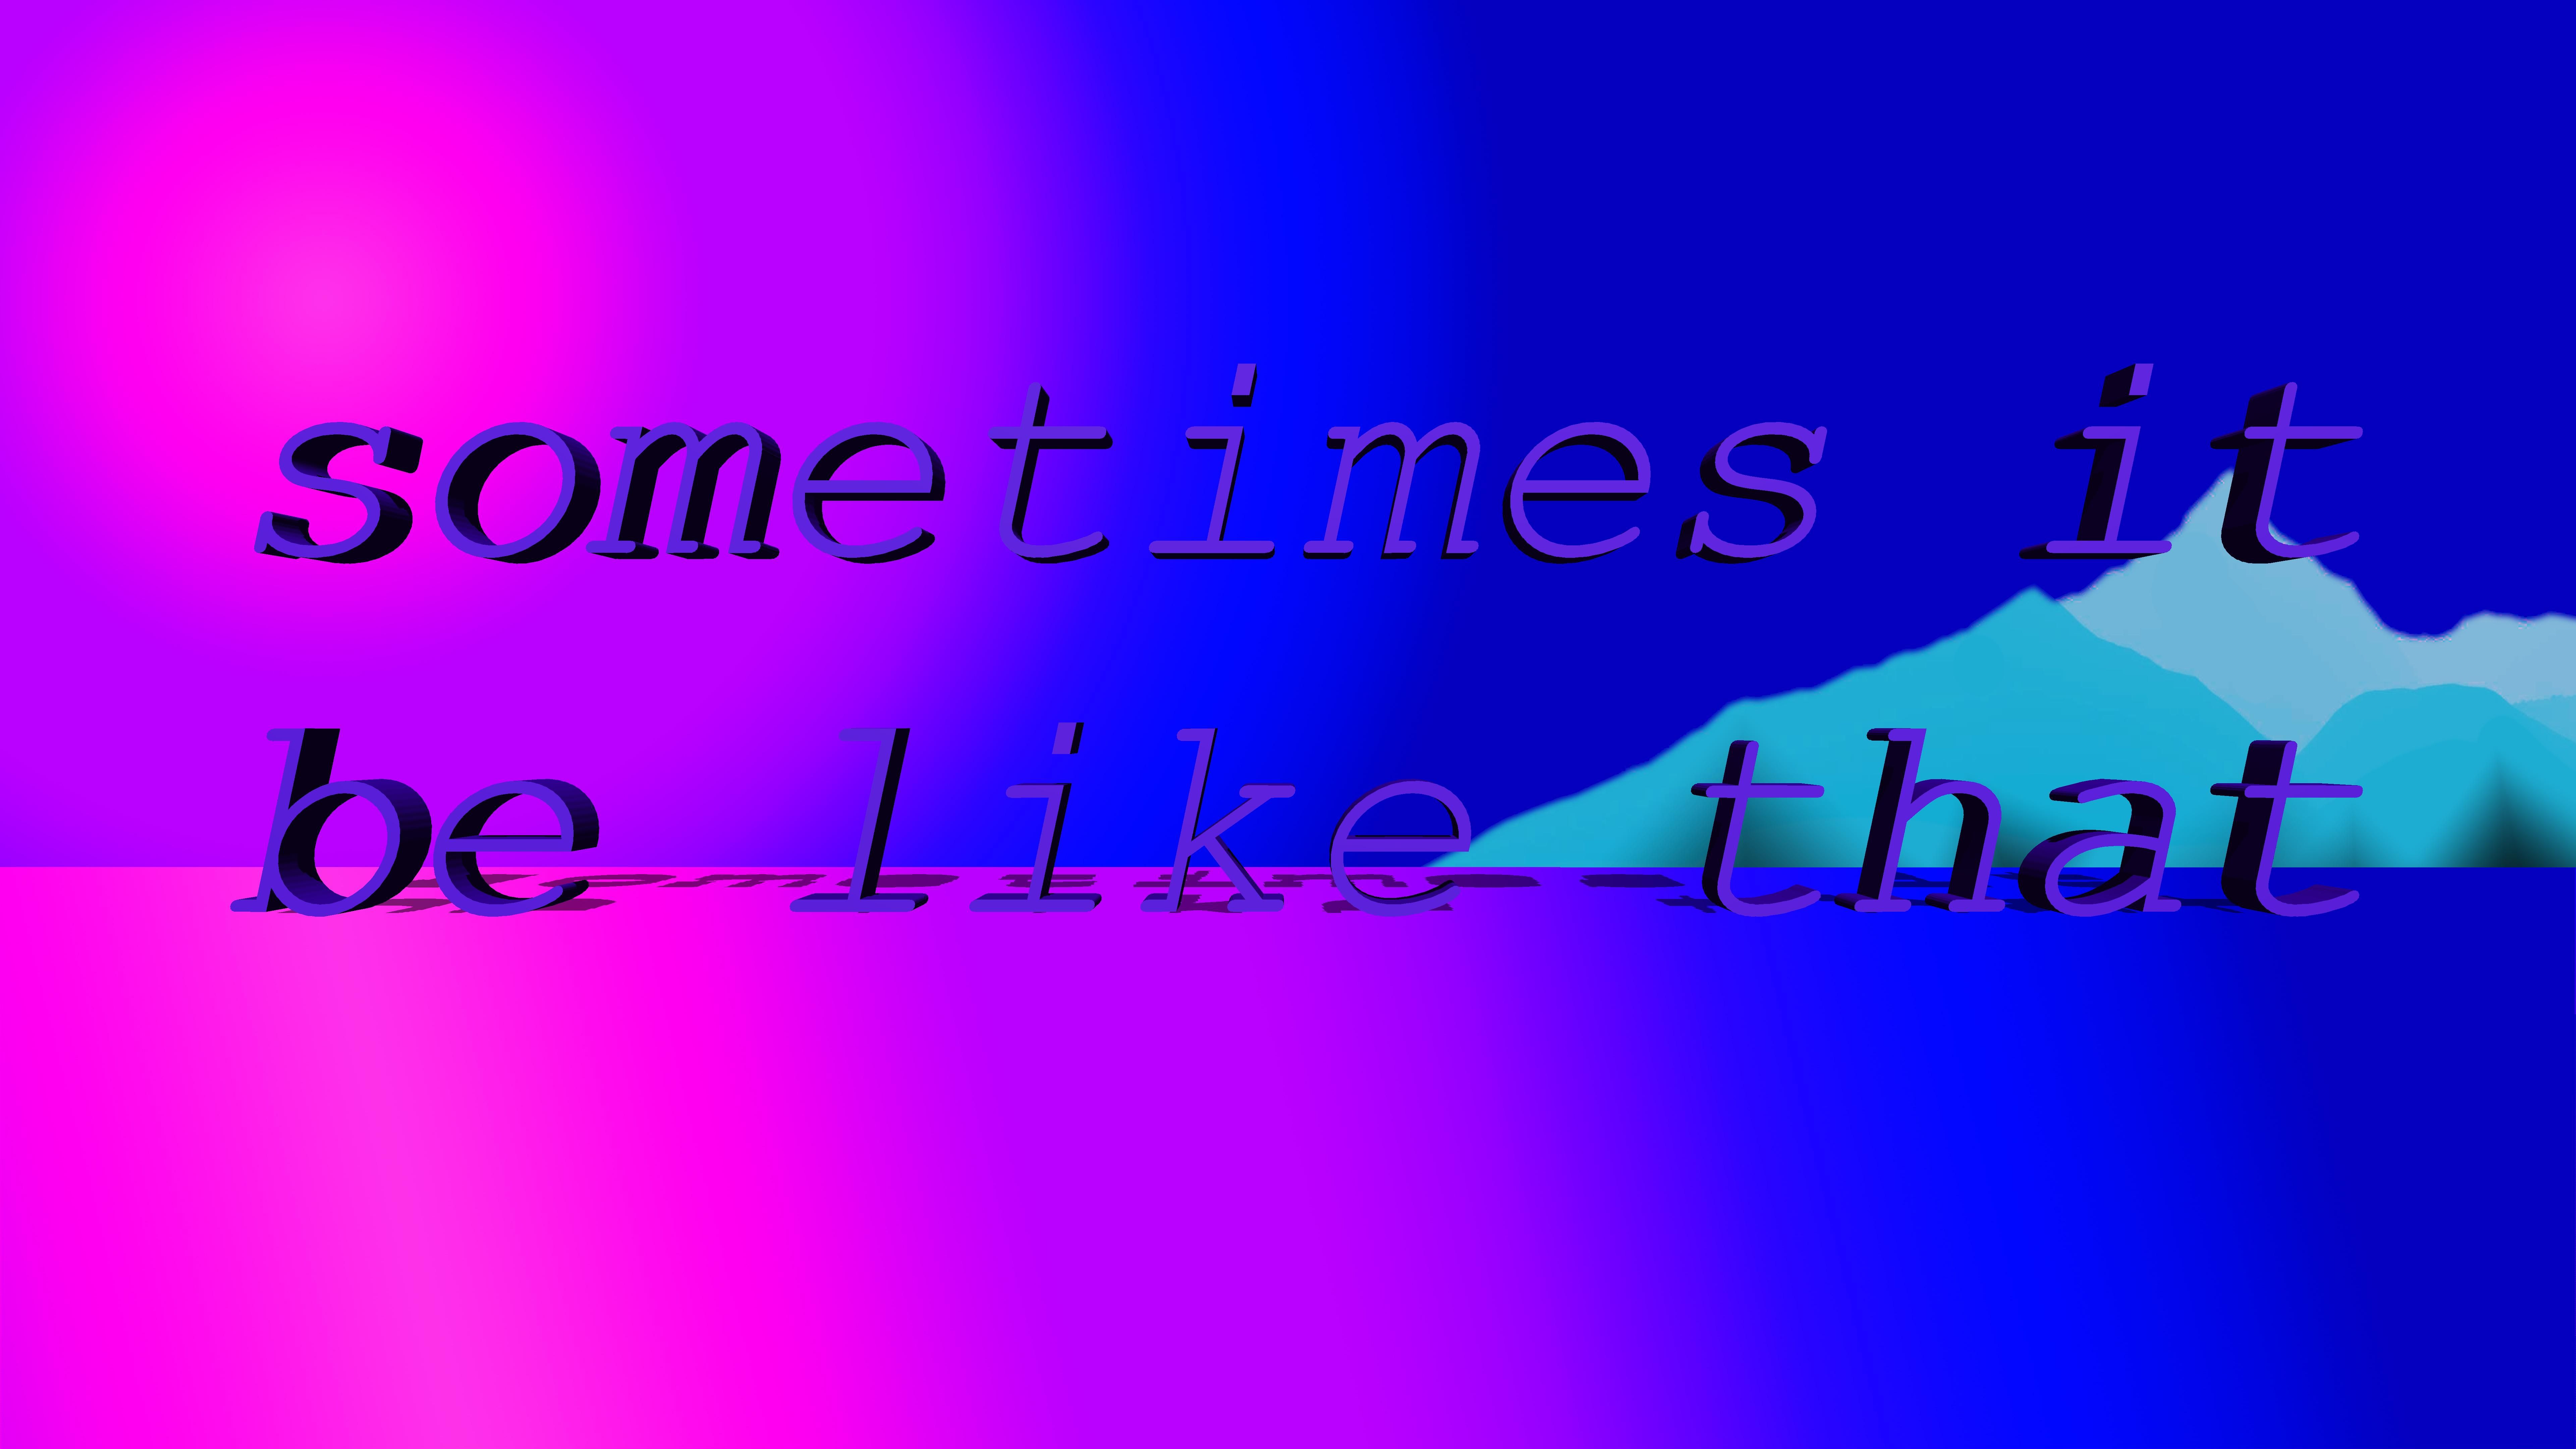 I Made This Shitty Wallpaper With My Favourite Saying Use How You